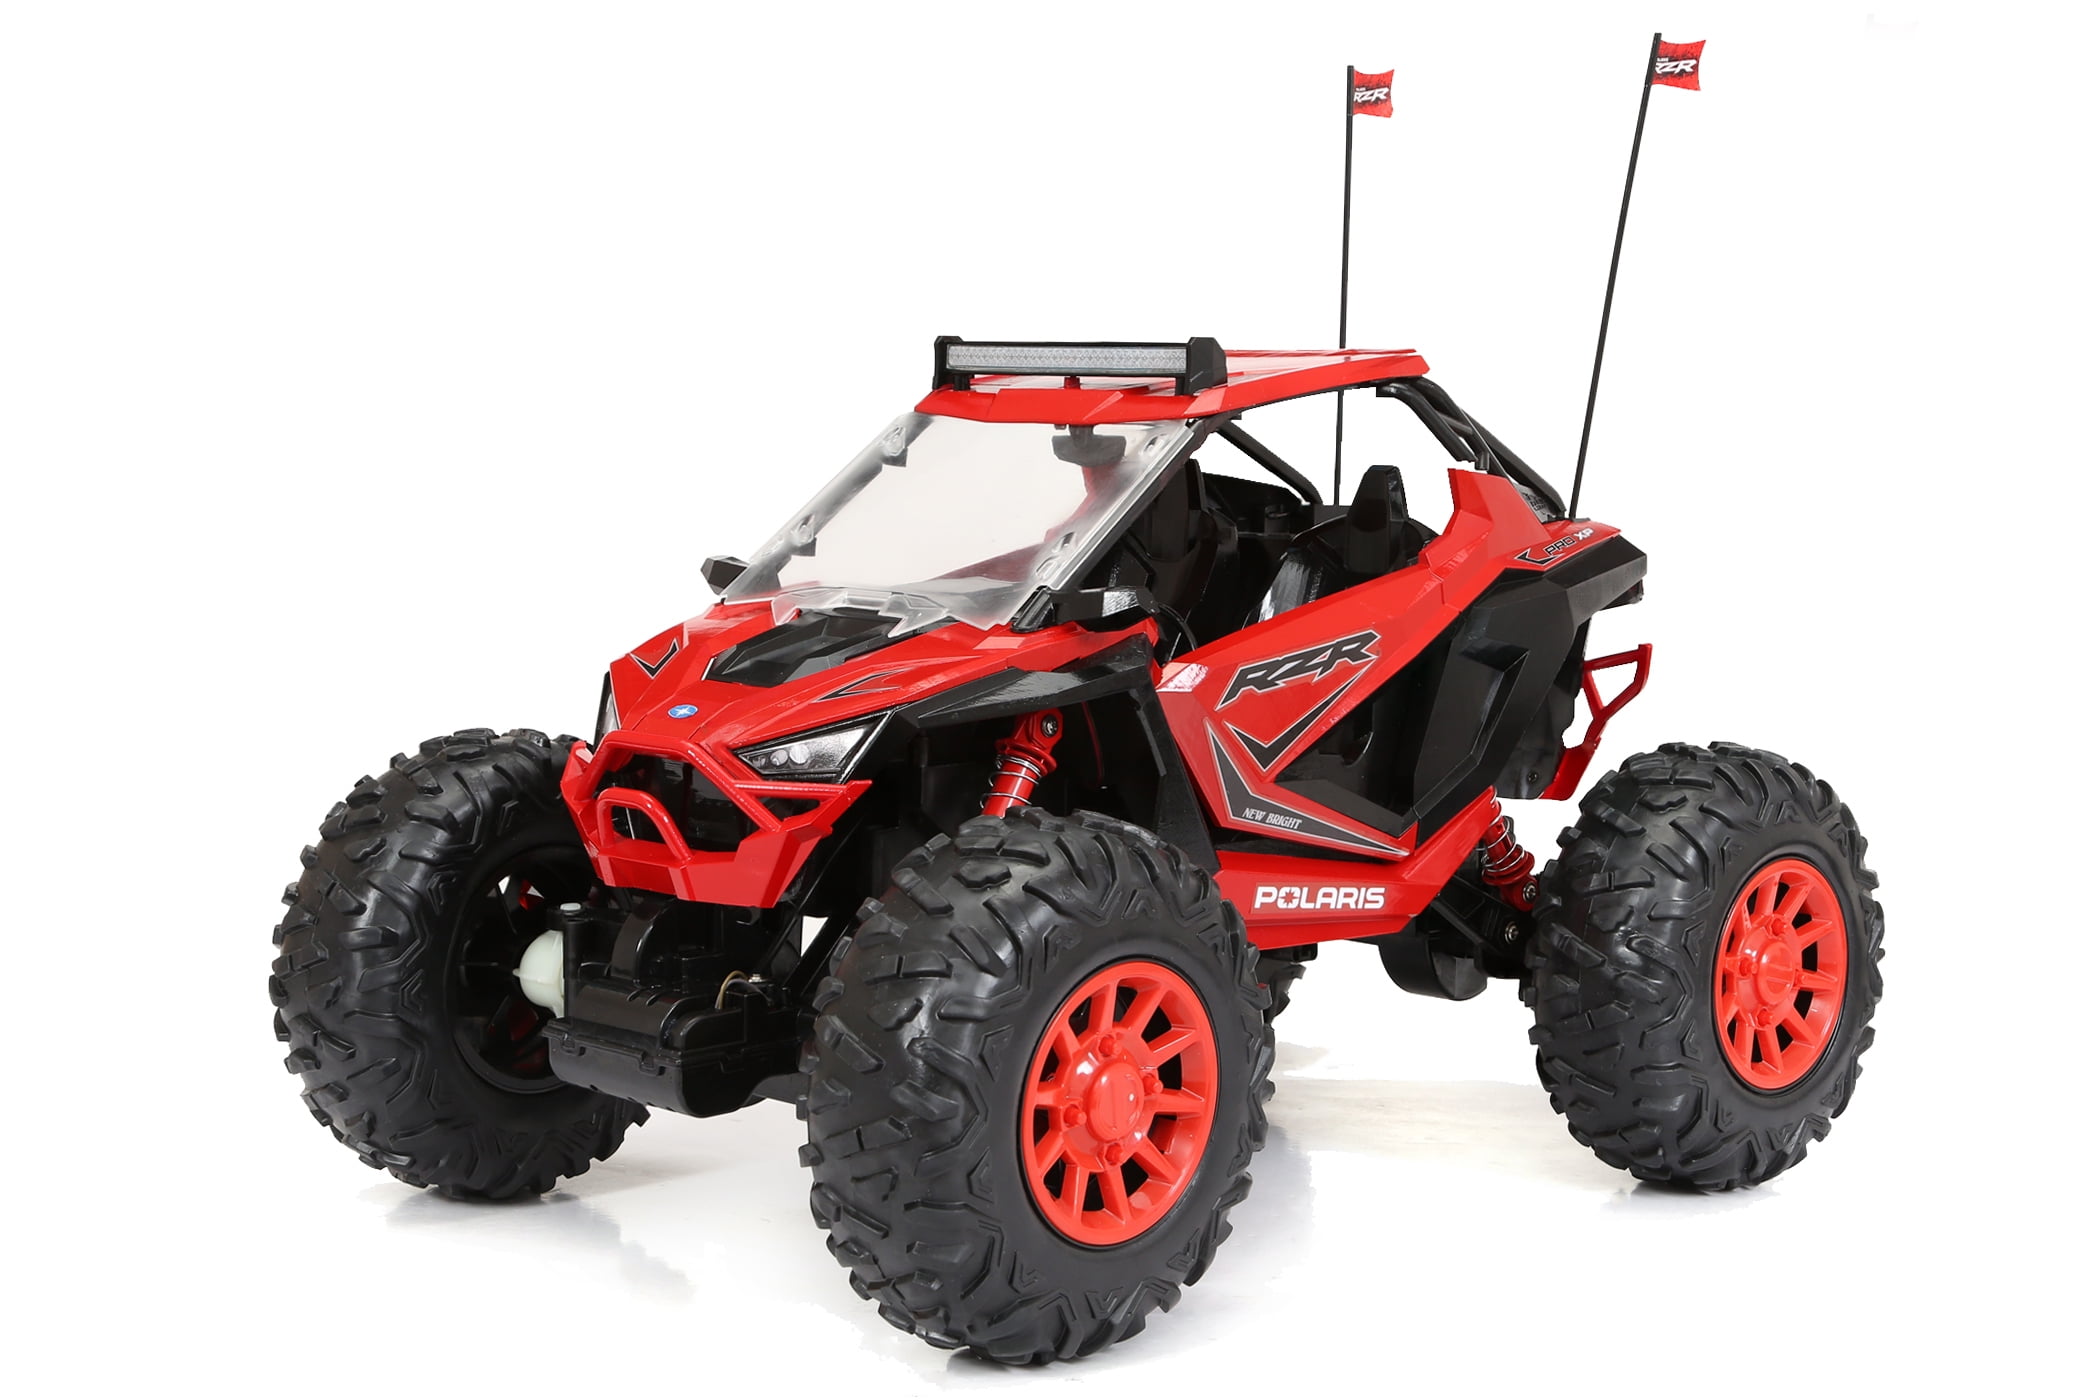 RED/BLACK New Opened Box 9.6v New Bright 2.4GHz 1:12 Scale Pro Dune Rebel 